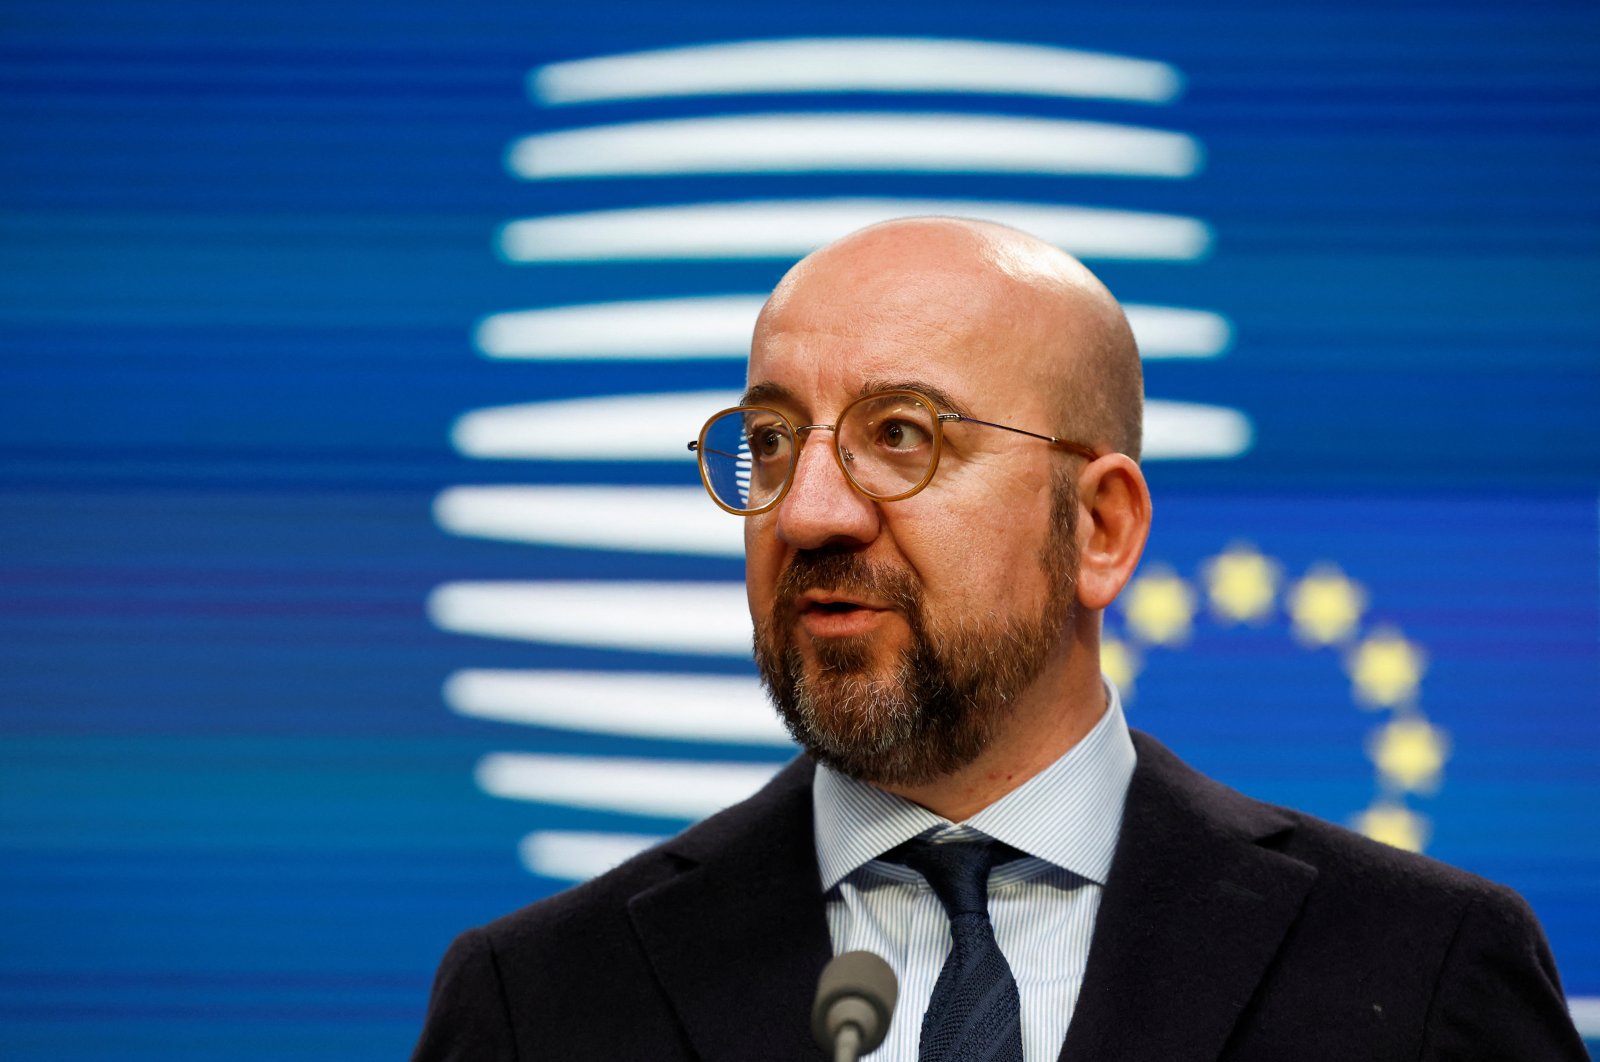 European Council President Charles Michel speaks at a news conference after the first day of the European leaders summit, Brussels, Belgium, Oct. 21, 2022. (Reuters Photo)